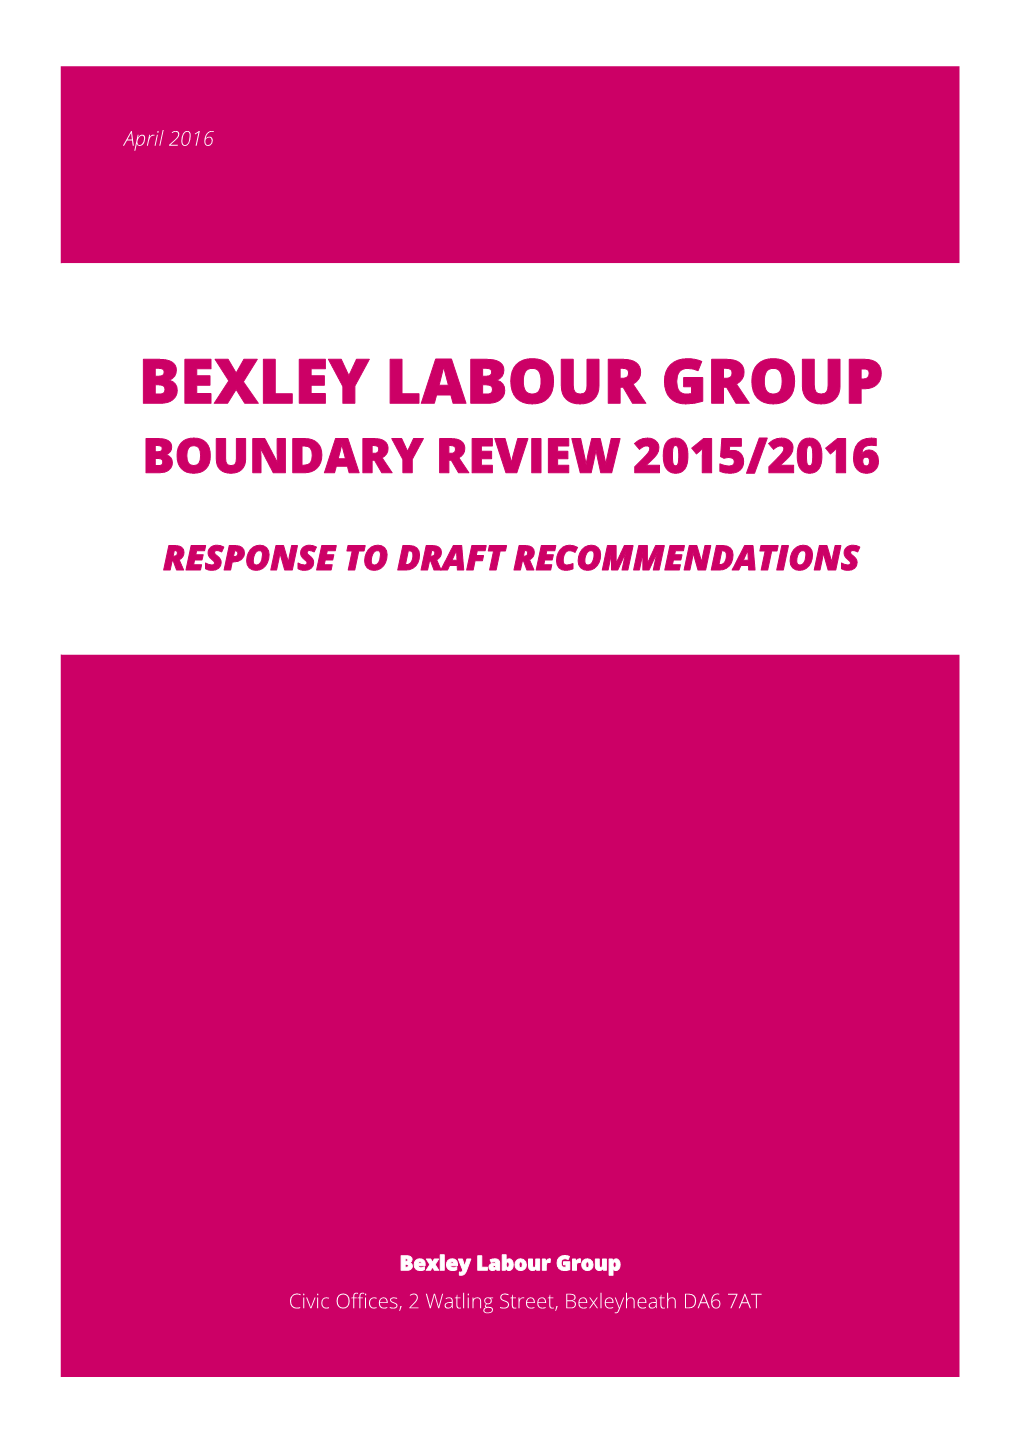 Bexley Labour Group Boundary Review 2015/2016